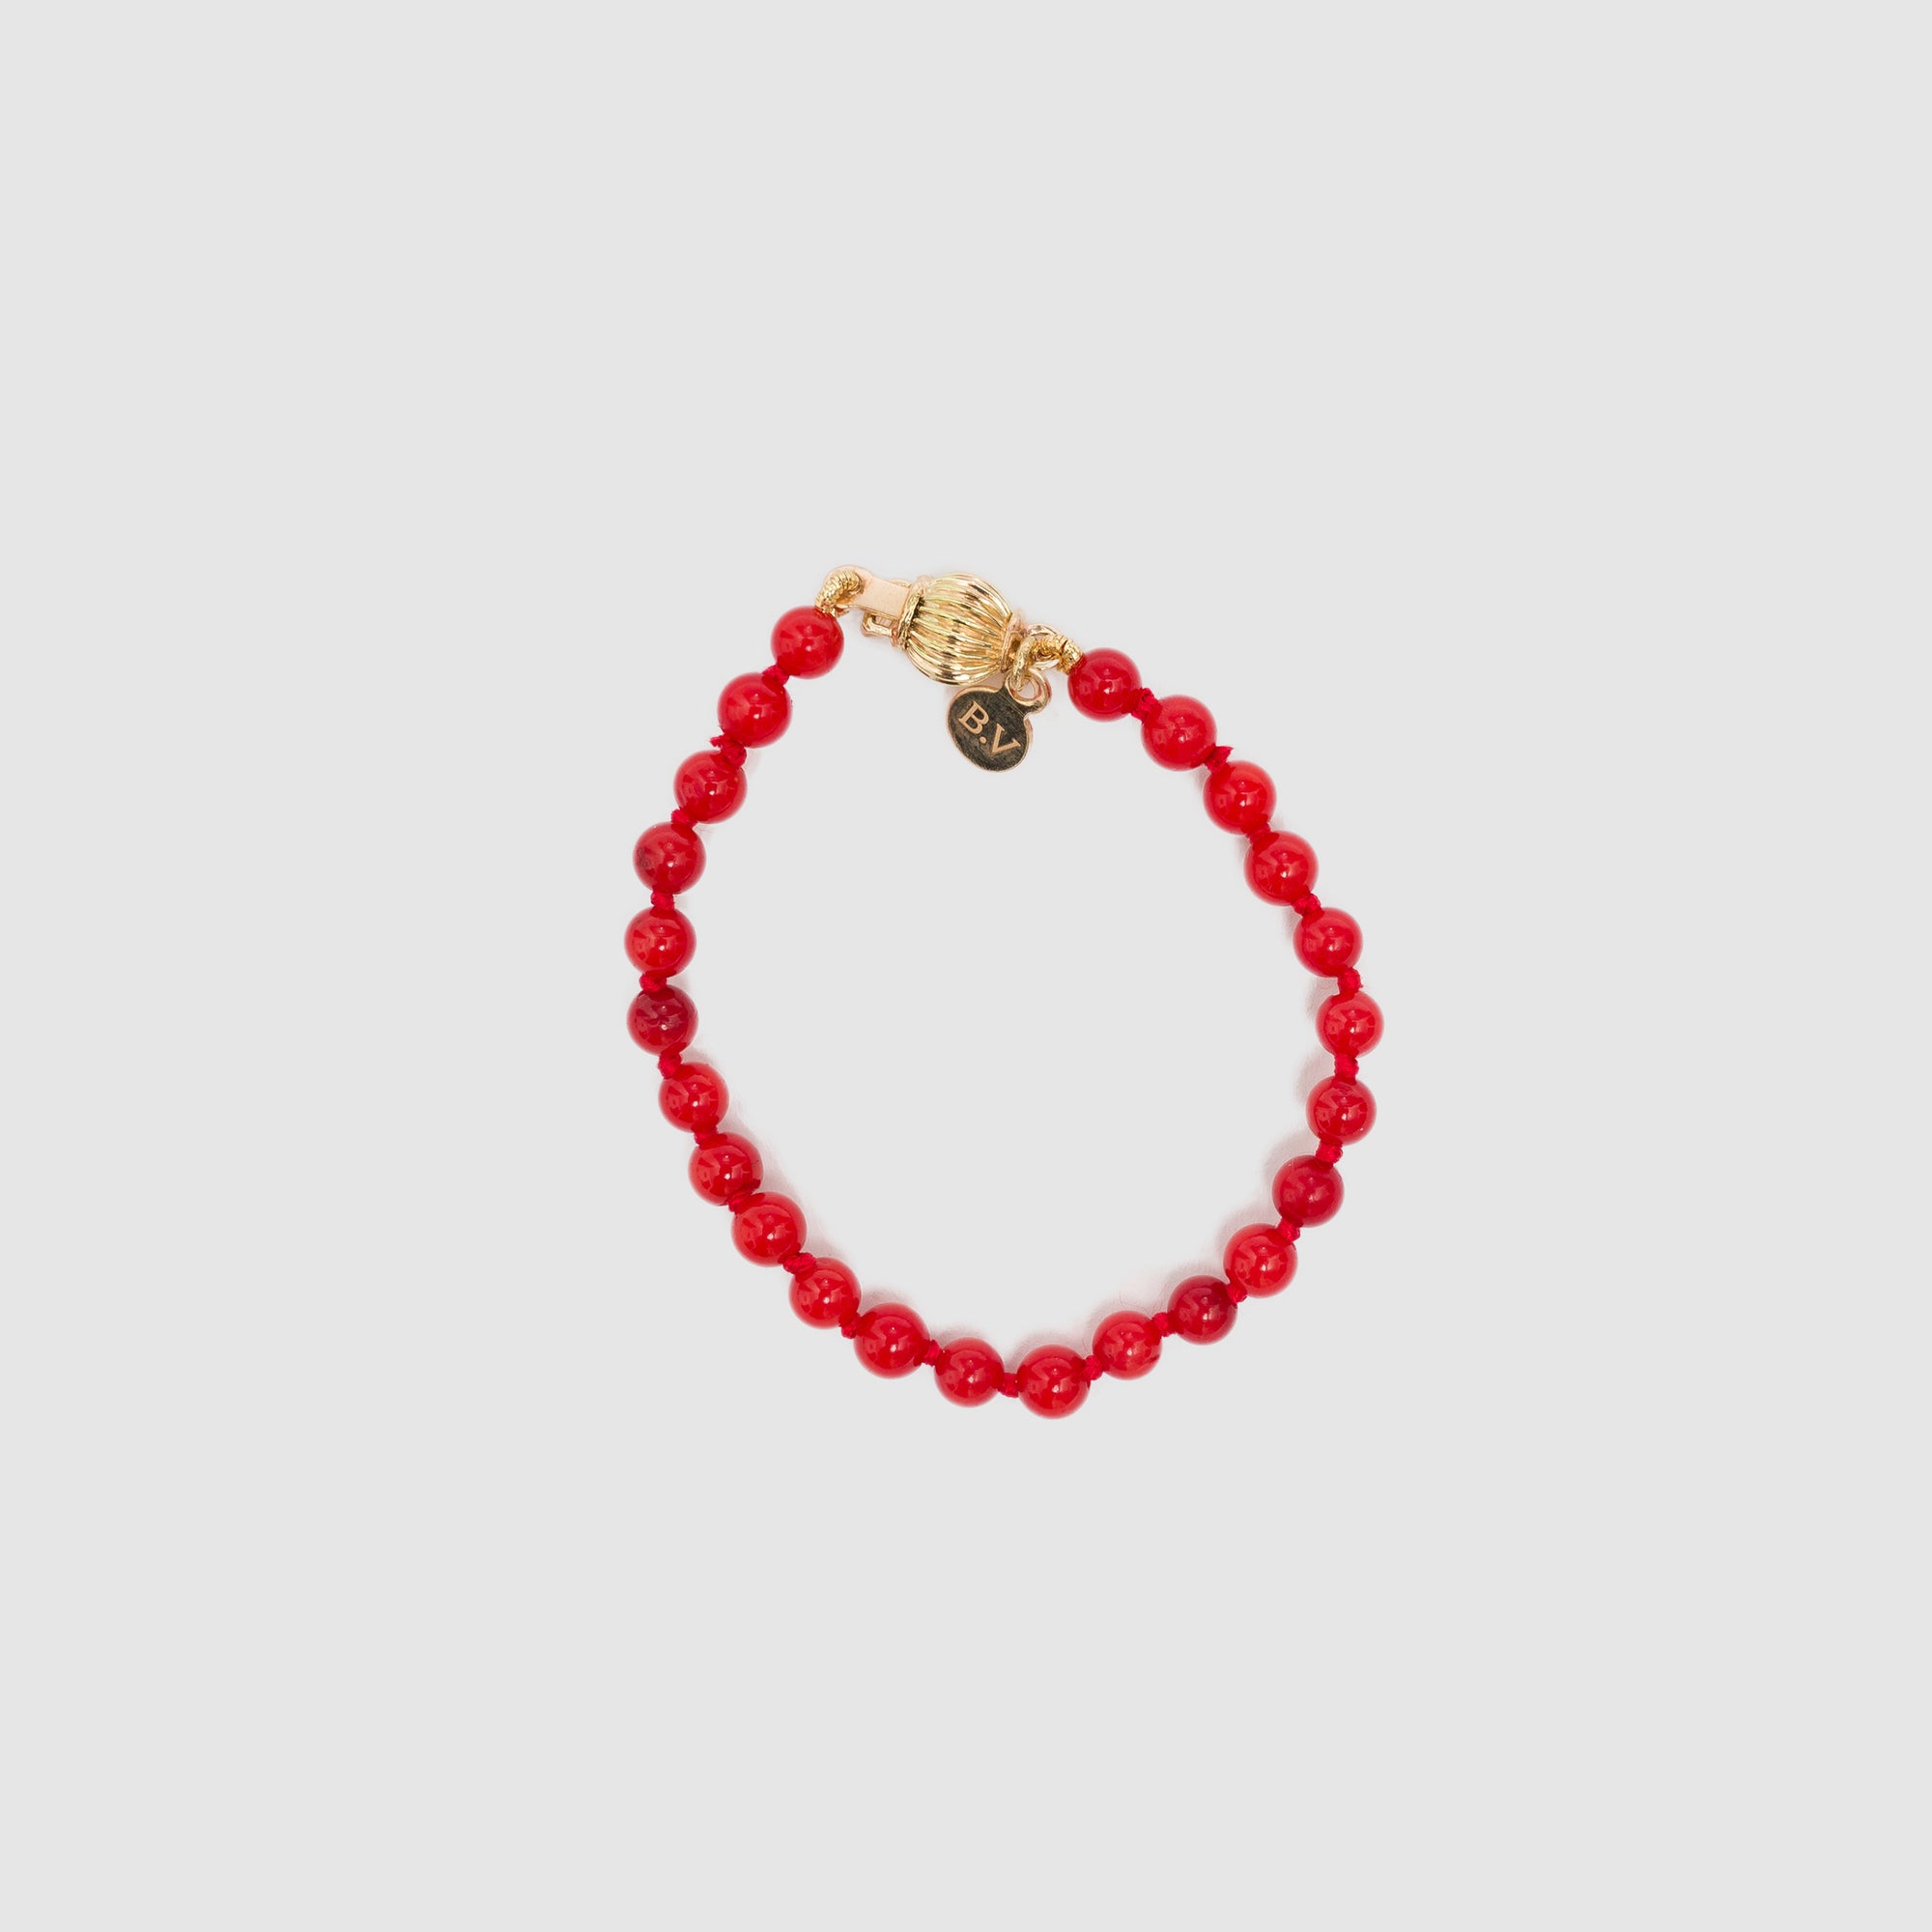 Coral Bracelet in pure silver flower caps - To Harmonizes Relationship -  Engineered to Heal²